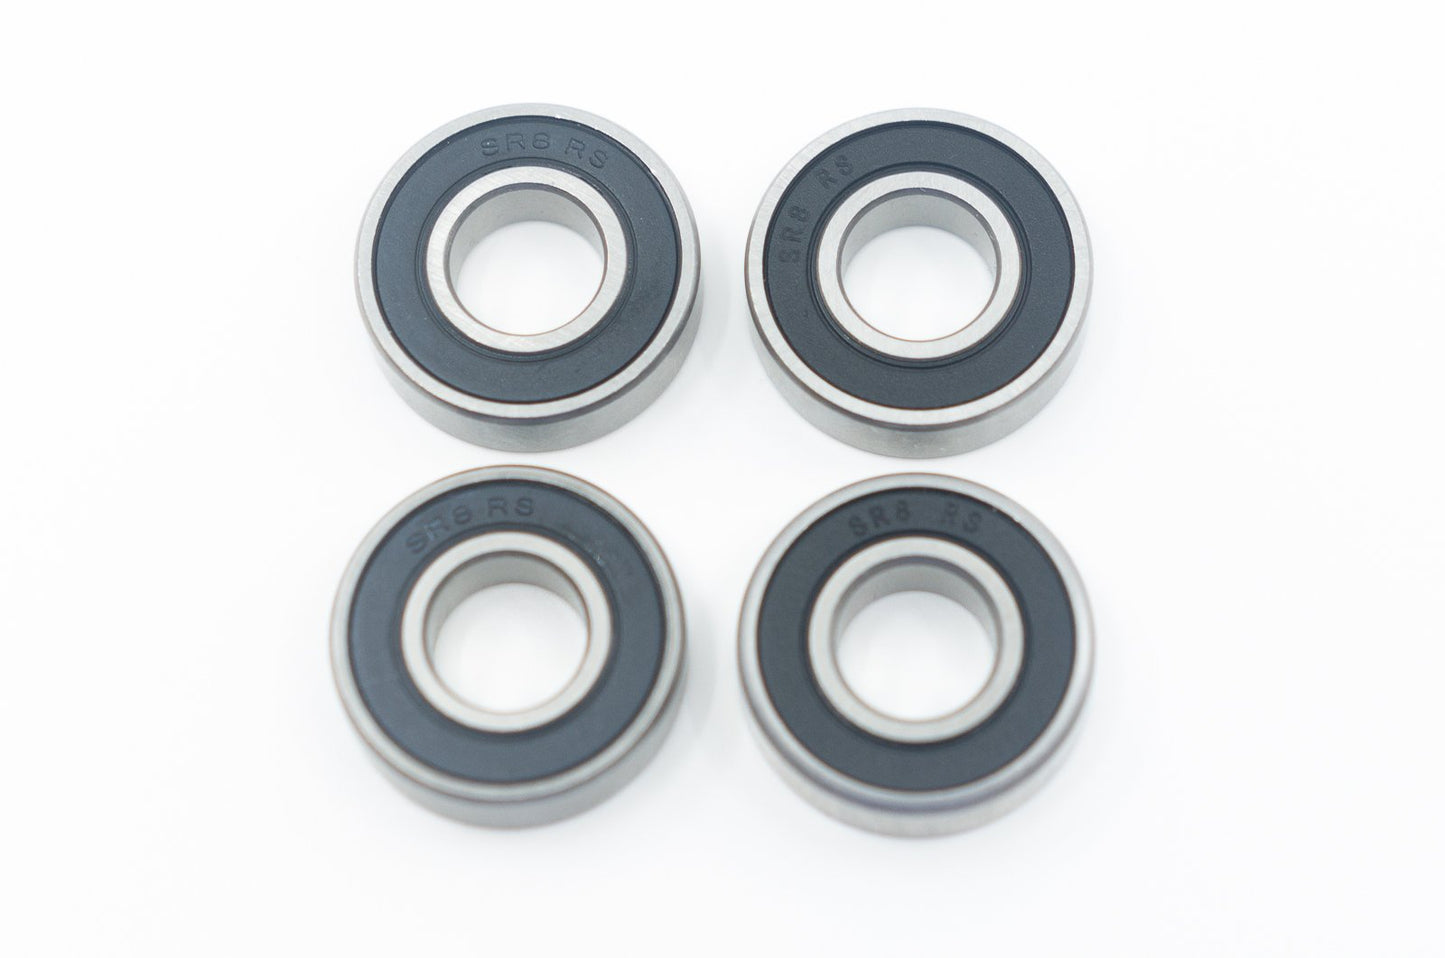 Stainless Steel Shower Wheelchair Bearing SR8 1/2" ABEC-1 1/2x1-1/8x.3125" (4-Pack)